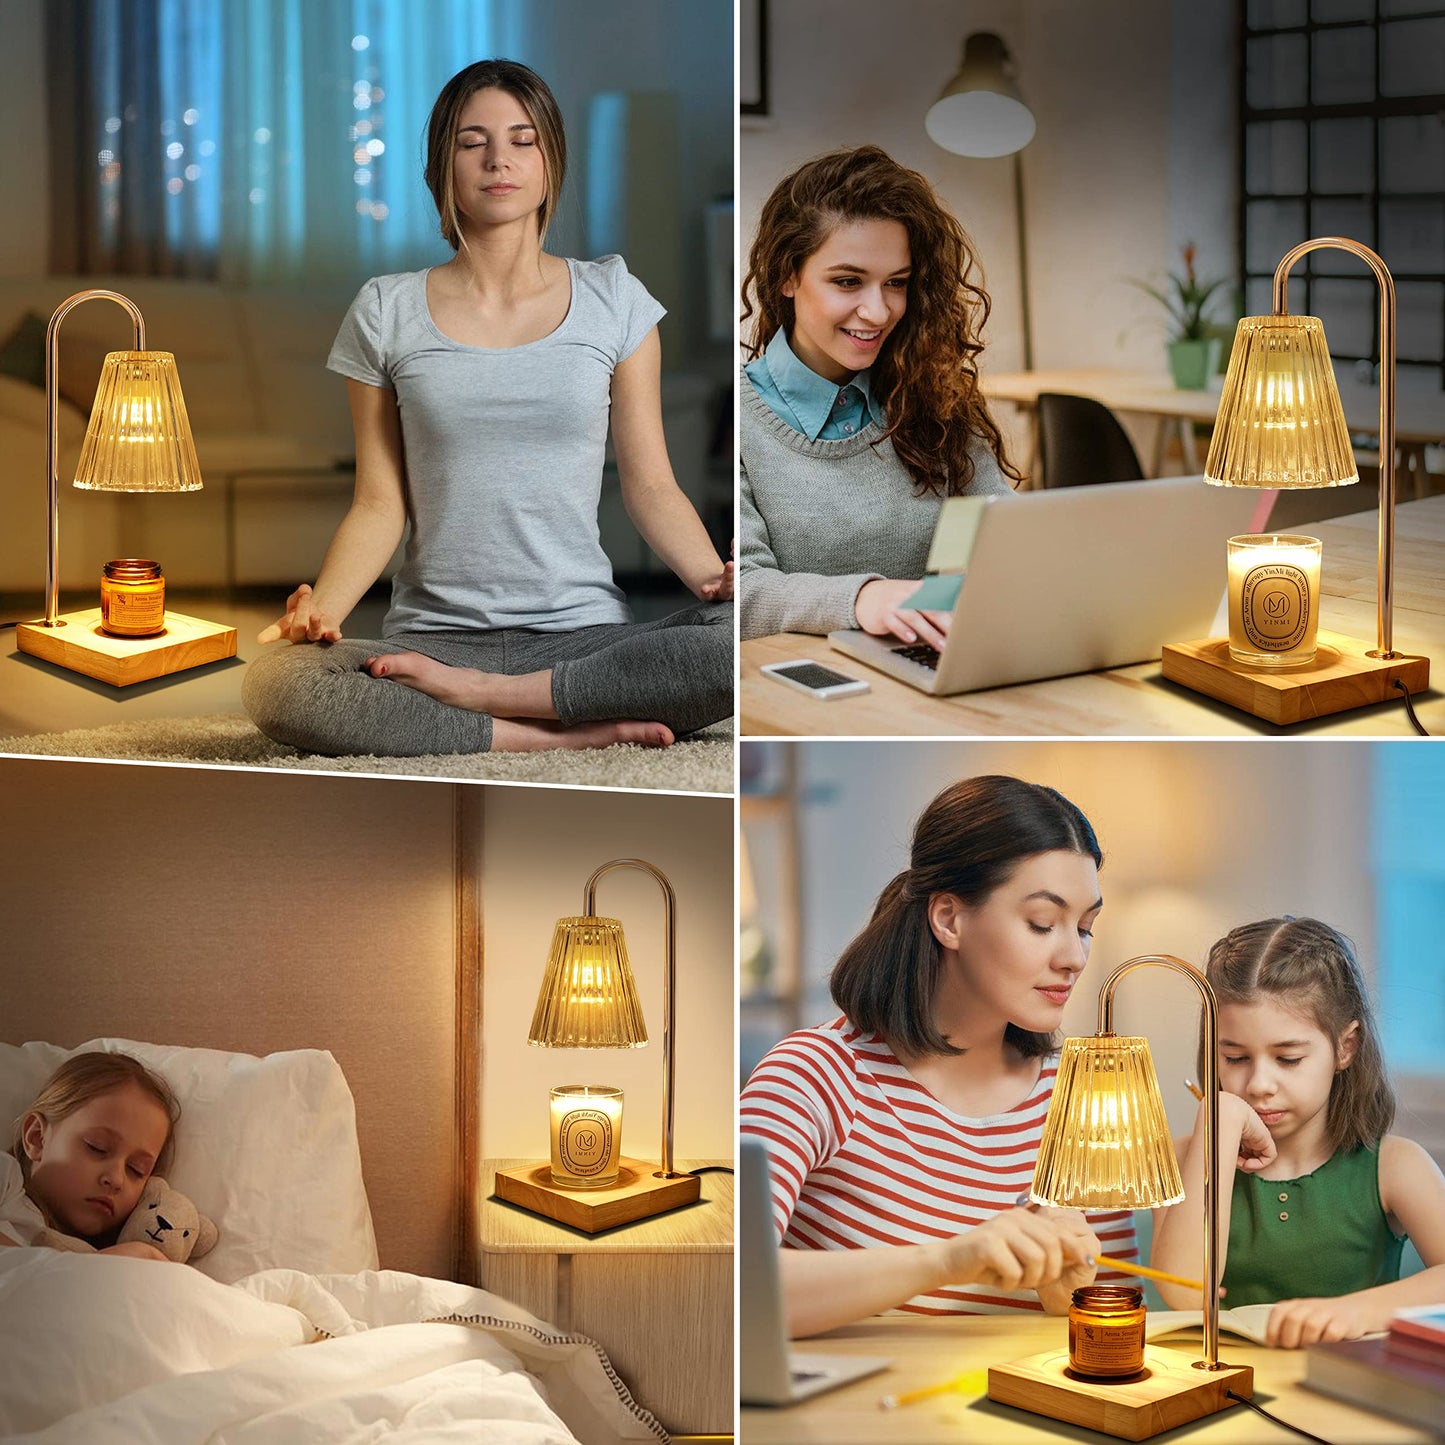 Candle Warmer Lamp - Dimmable Scented Electric Candle Warmer with Timer, Compatible with Large & Small Candle Jars, 4 Bulbs Included(Clear)